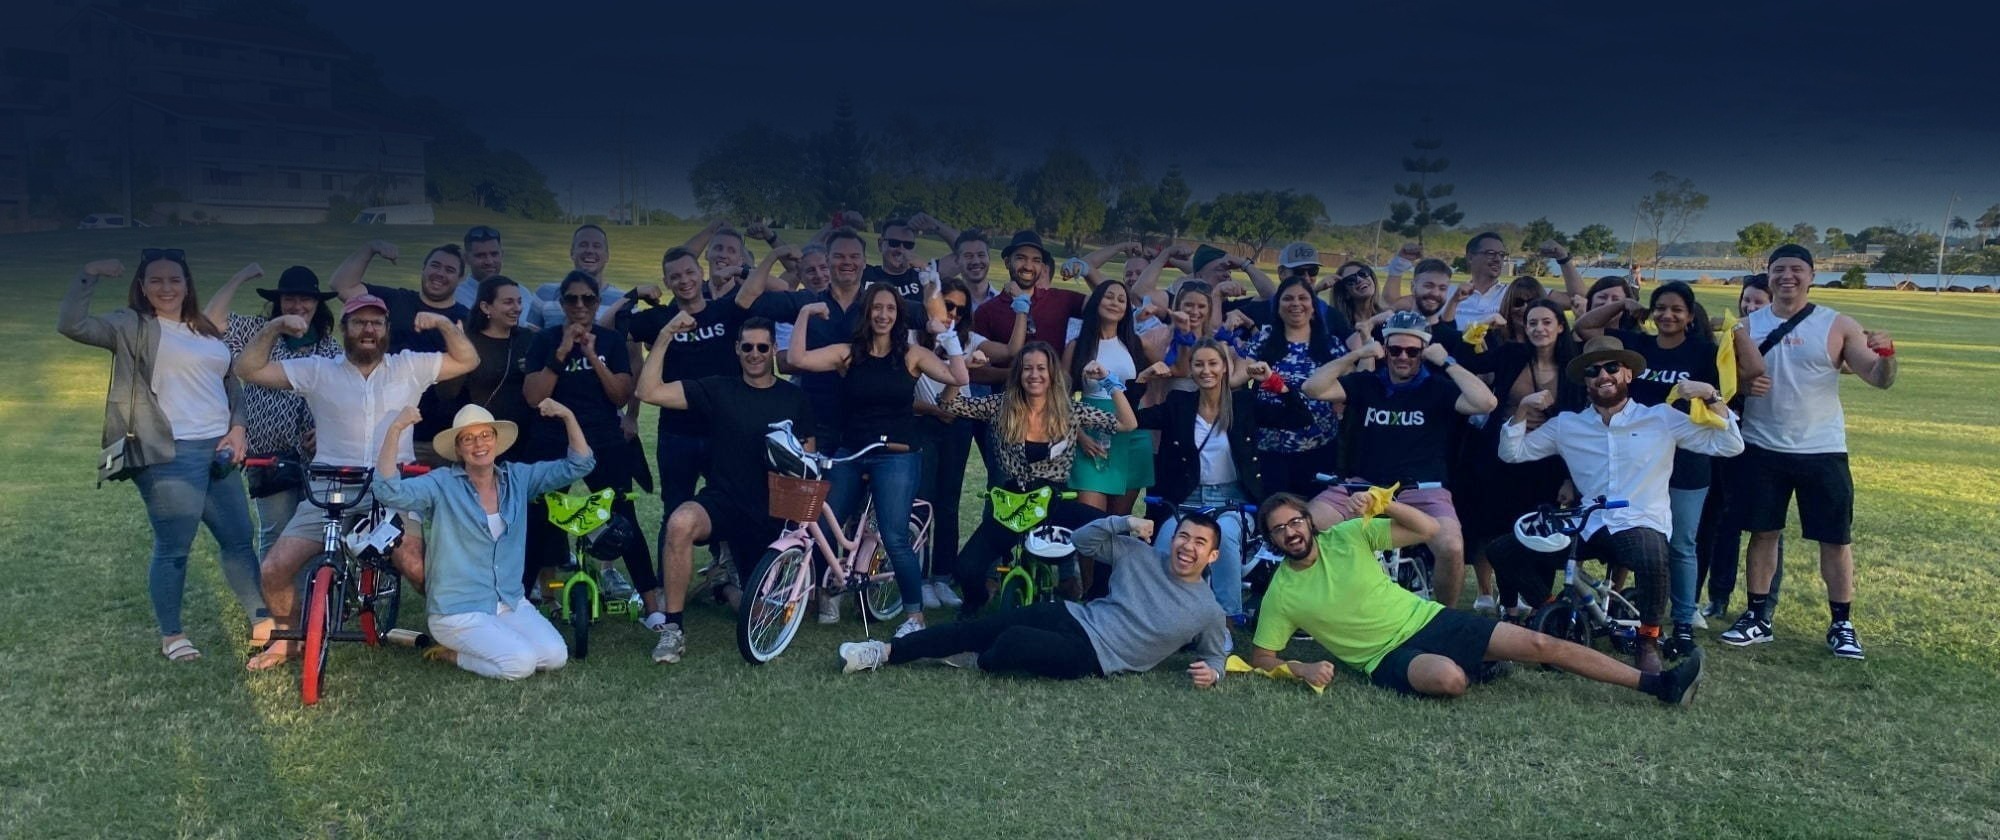 A large, cheerful group of people posing together outdoors on a grassy field, some sitting and some standing, with several individuals playfully holding up bicycles.